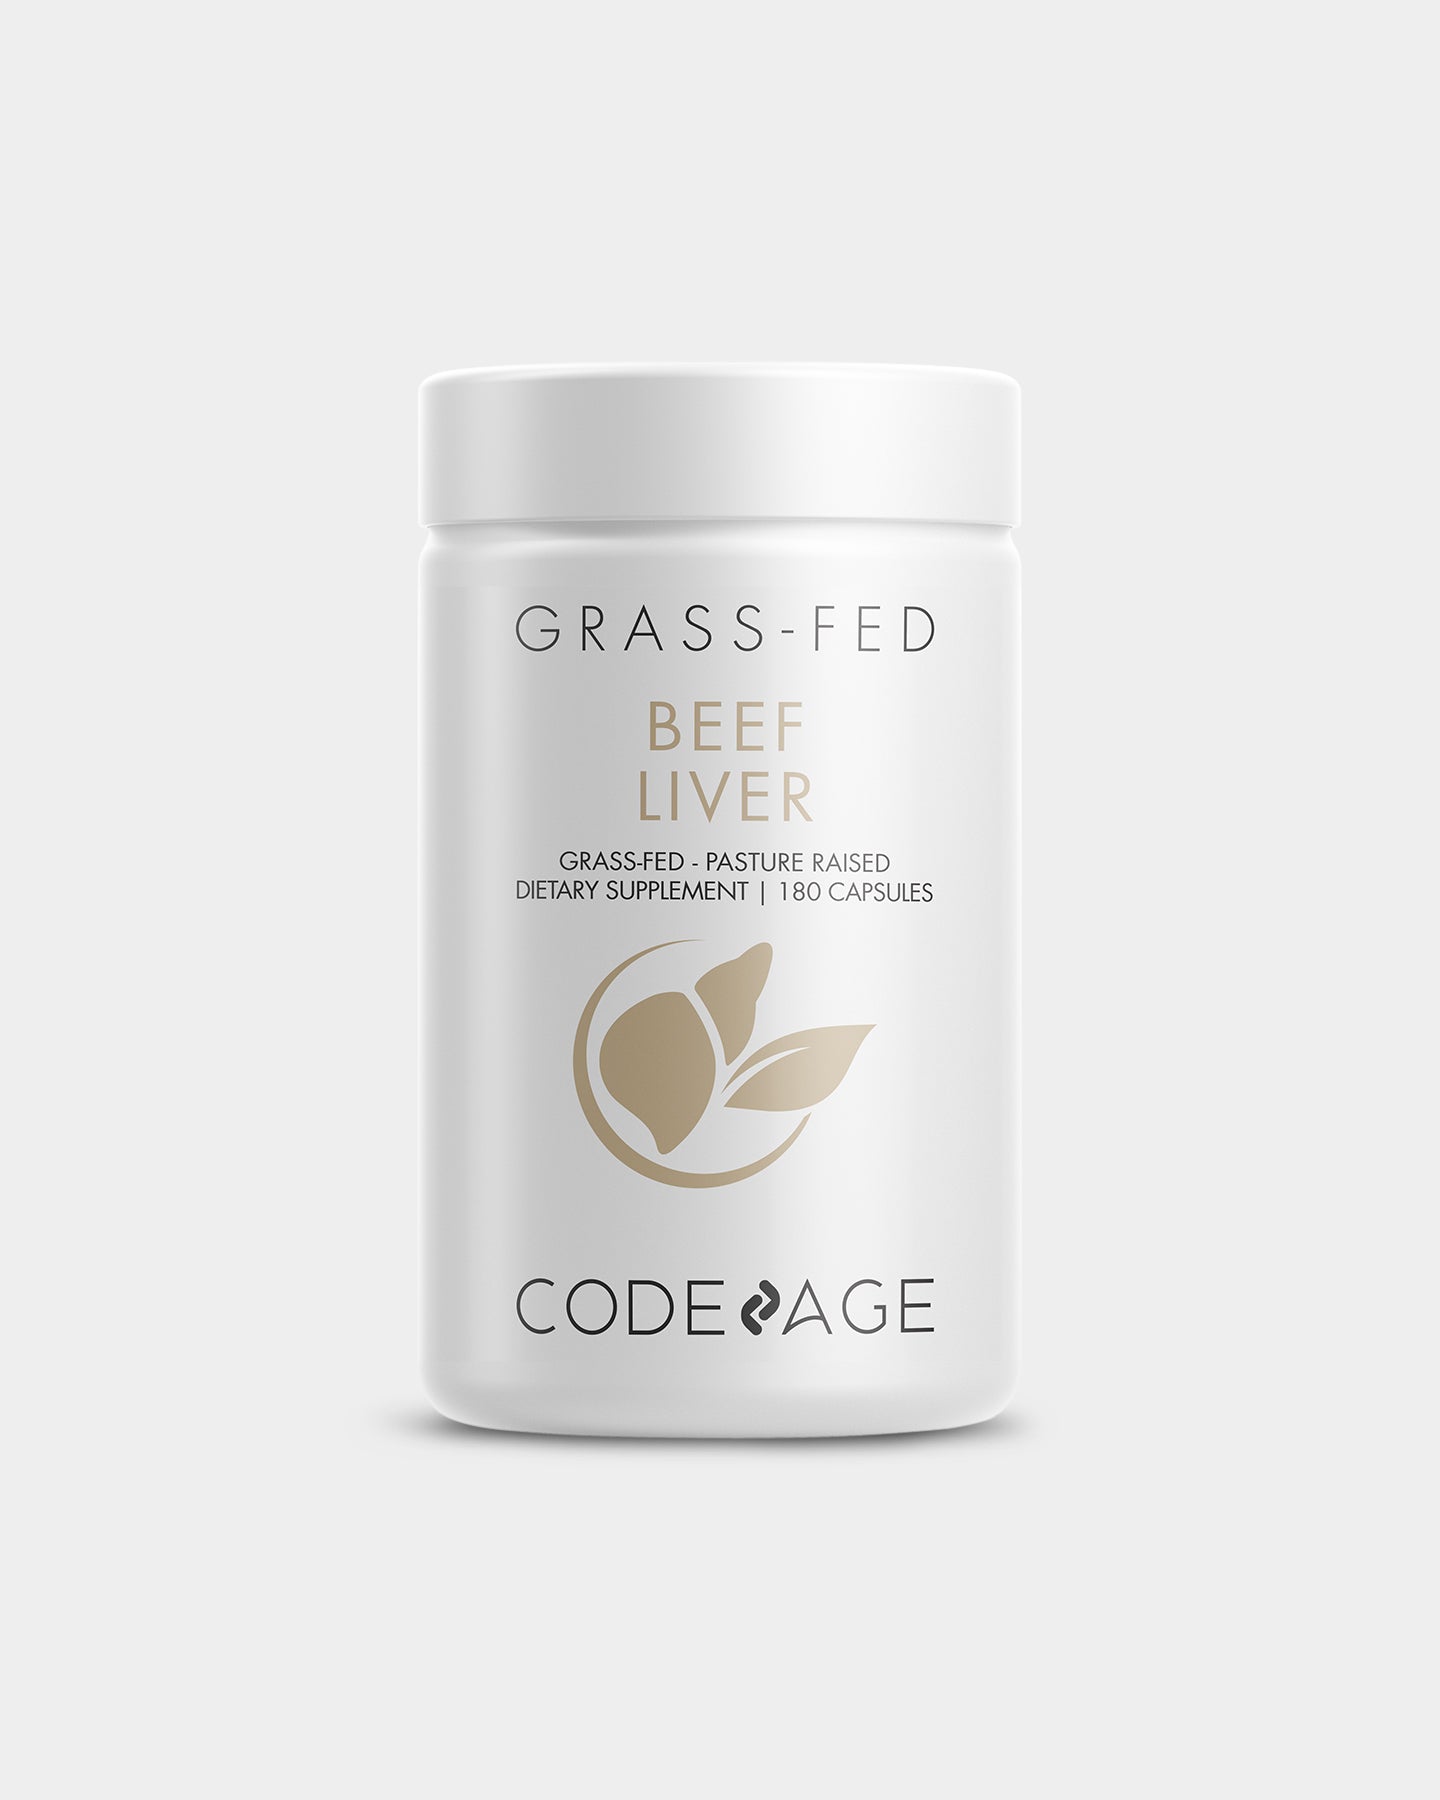 Codeage Grass Fed Beef Liver Pasturre Raised Dietary Supplement  A1